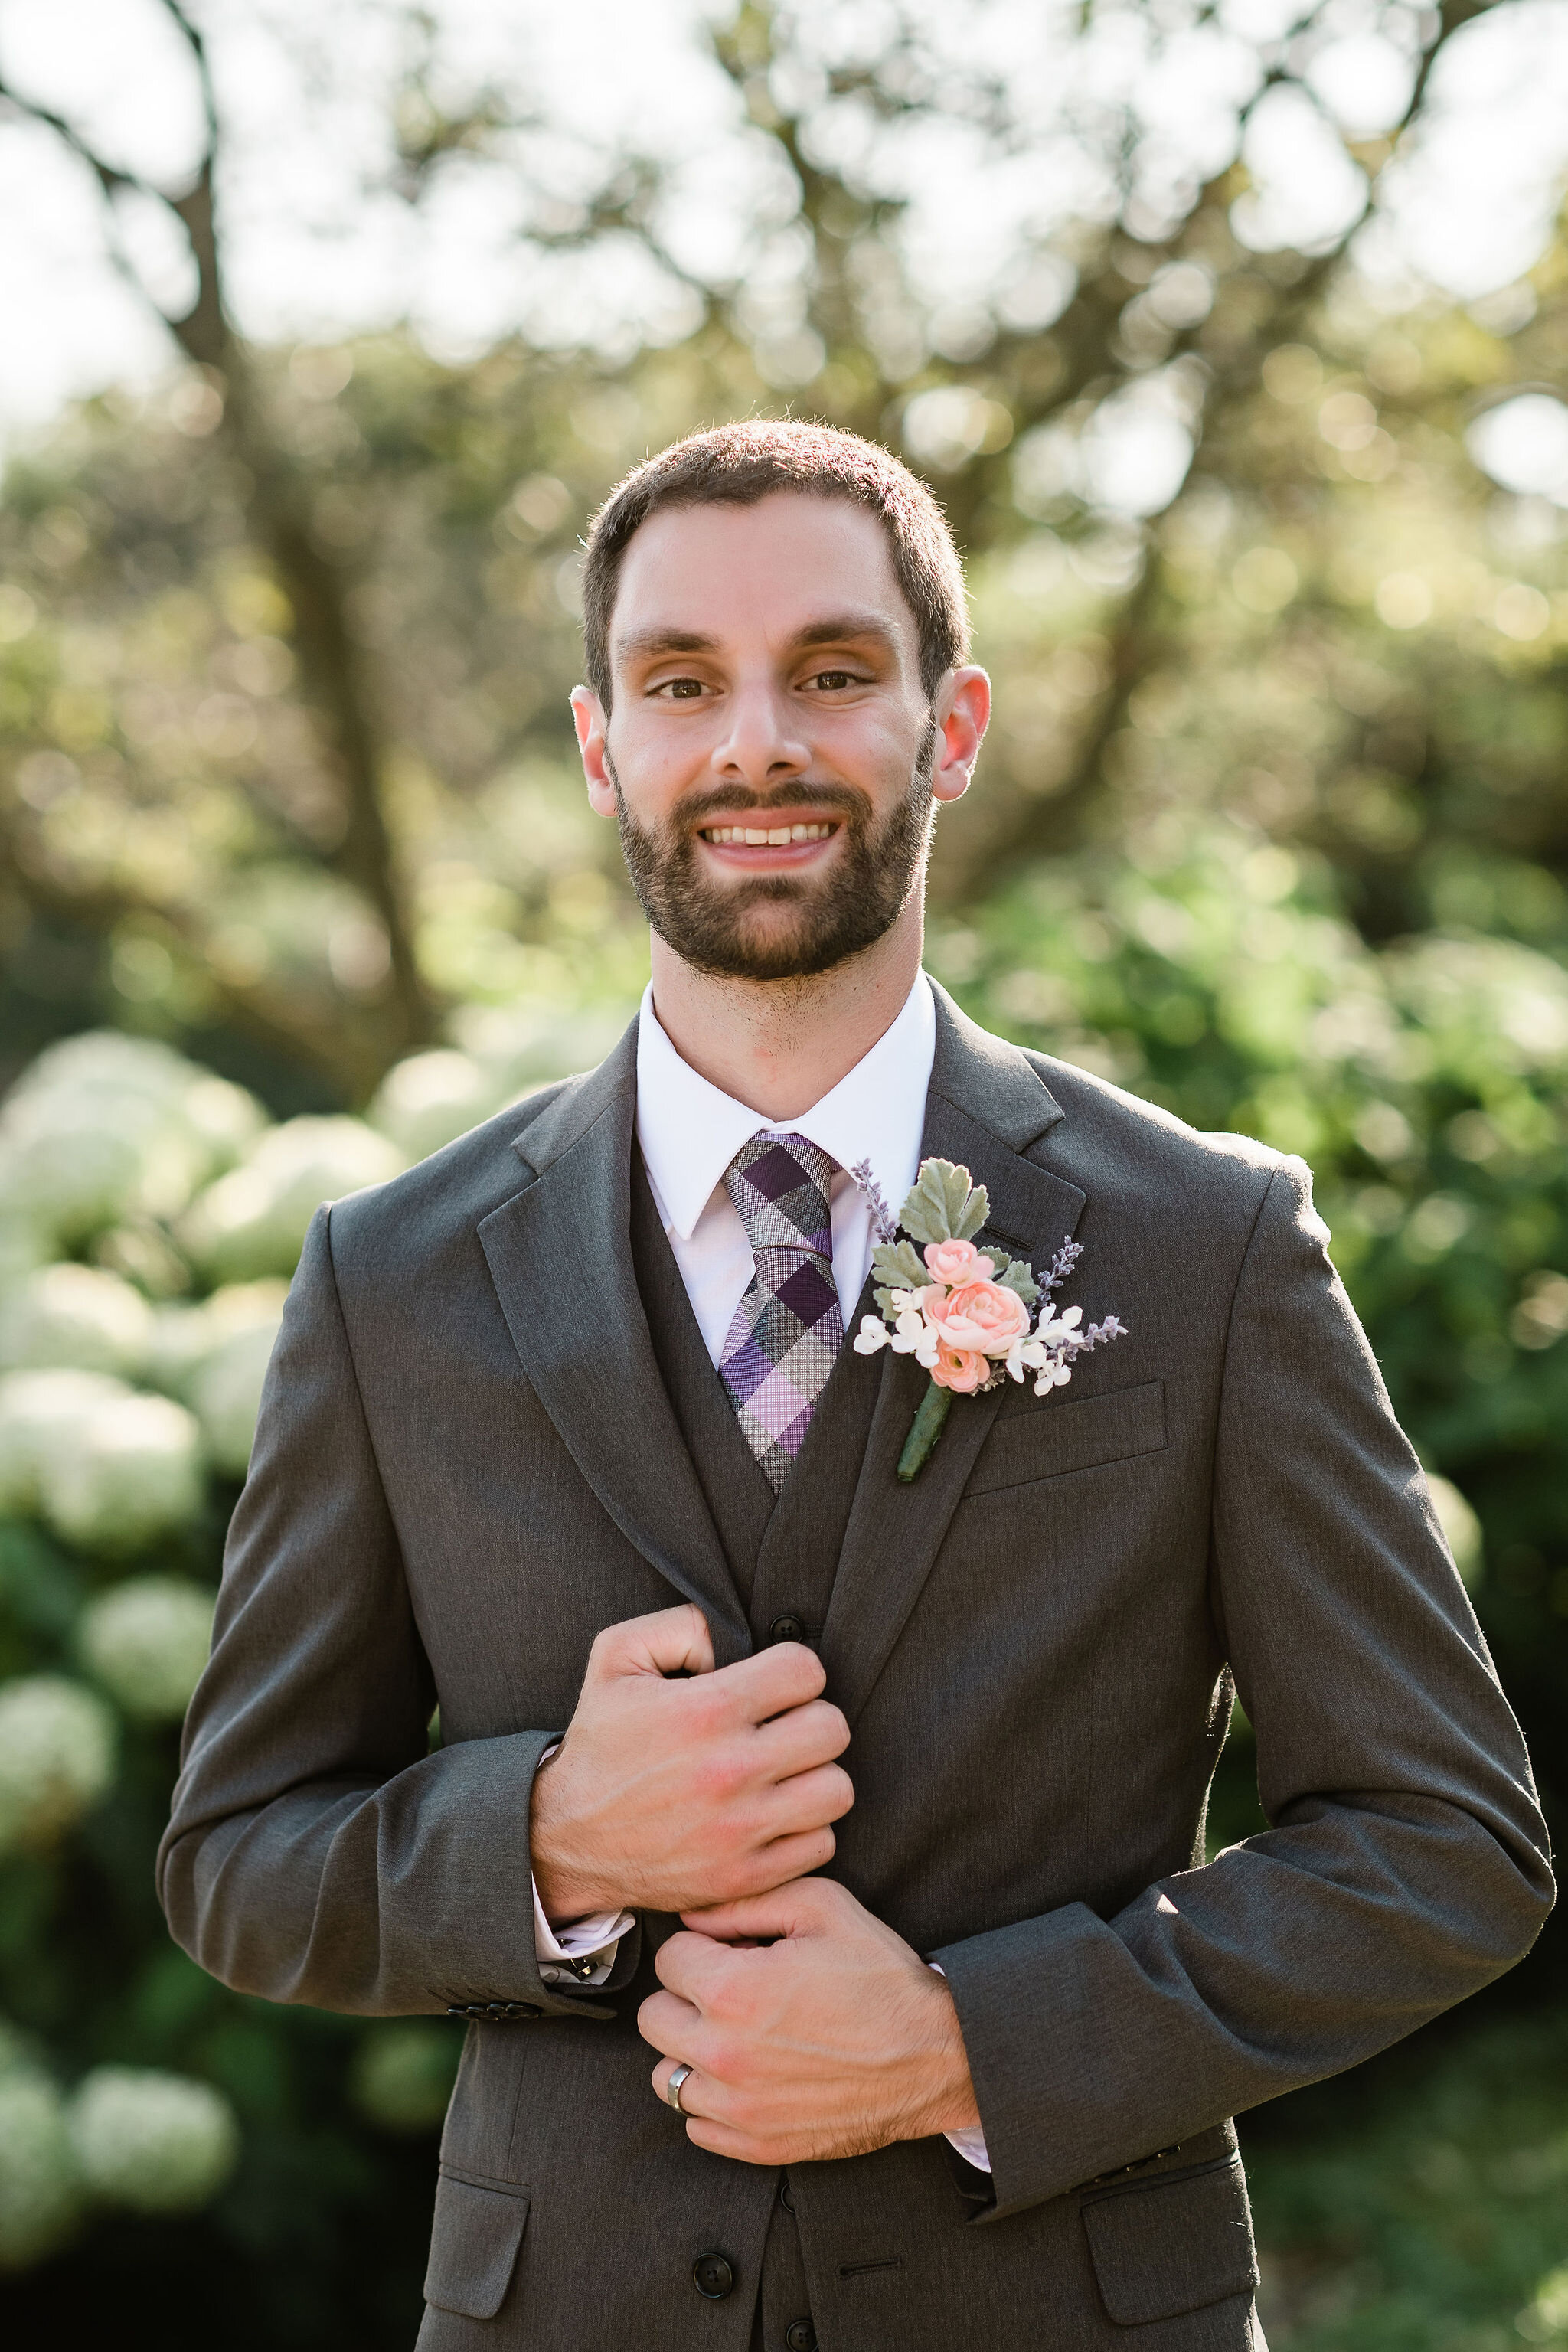 Groom holding onto his suit jacket